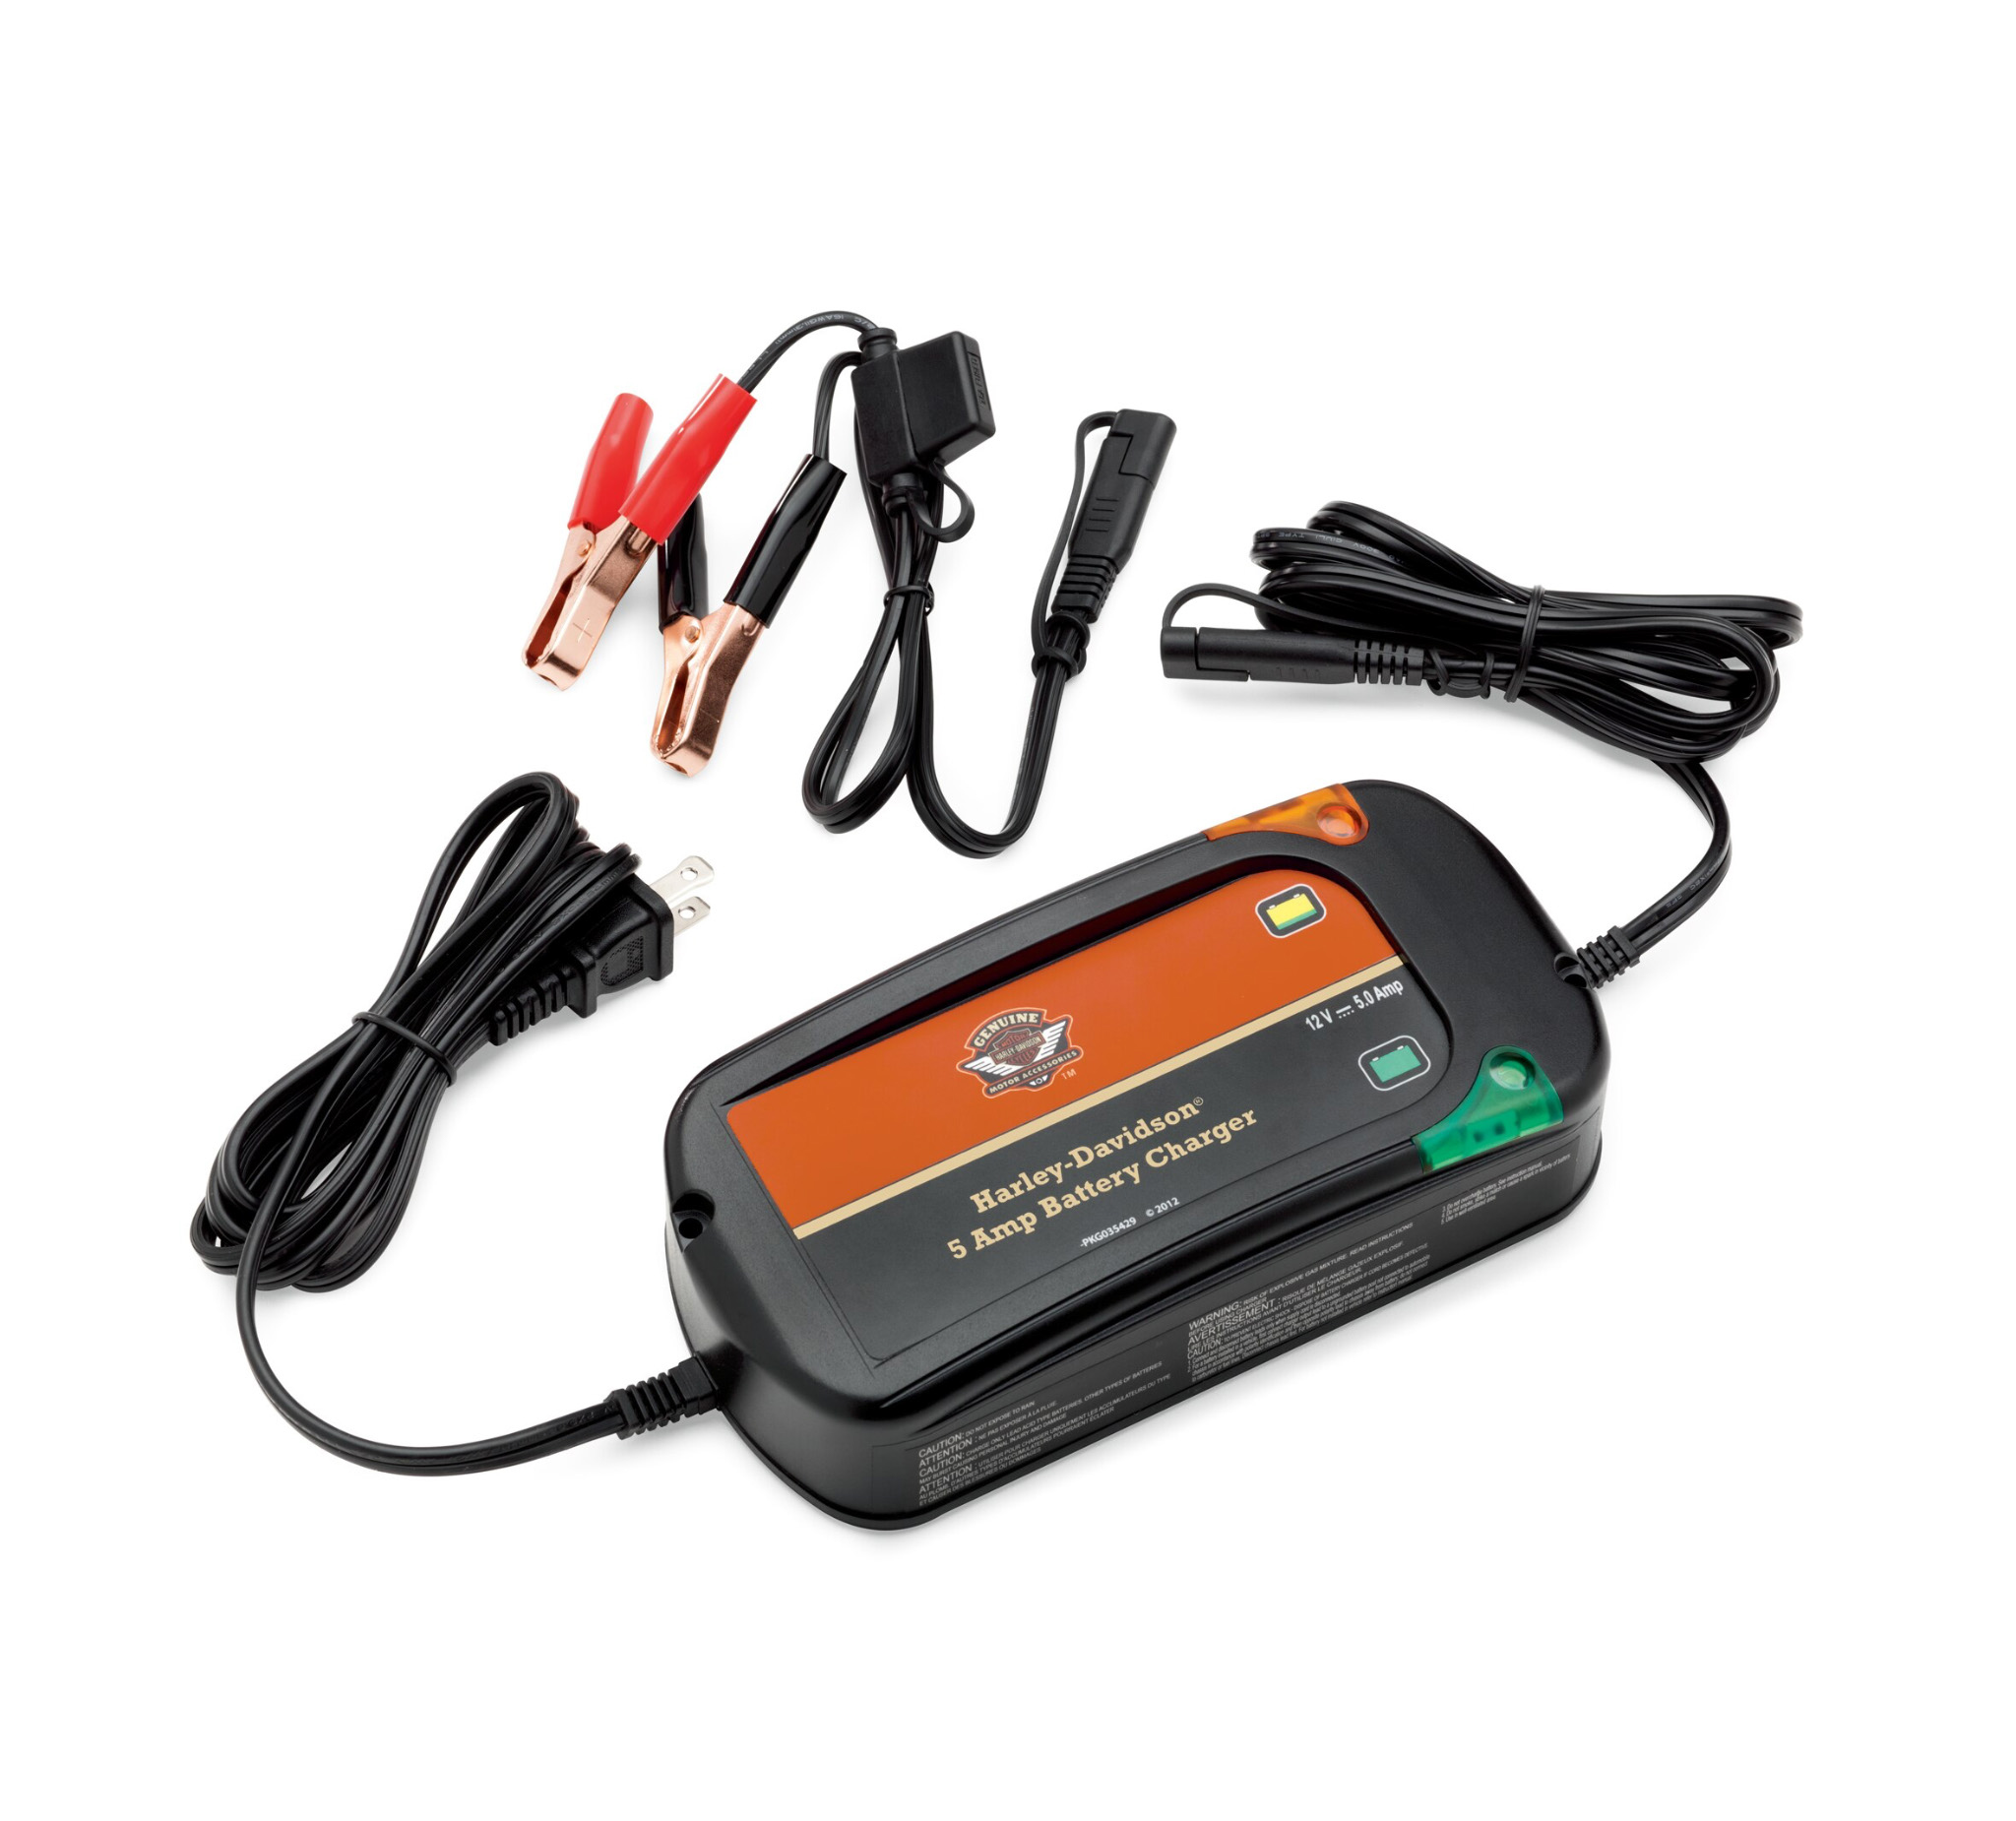 5 Amp Weather Resistant Battery Charger 66000041 Harley Davidson Europe